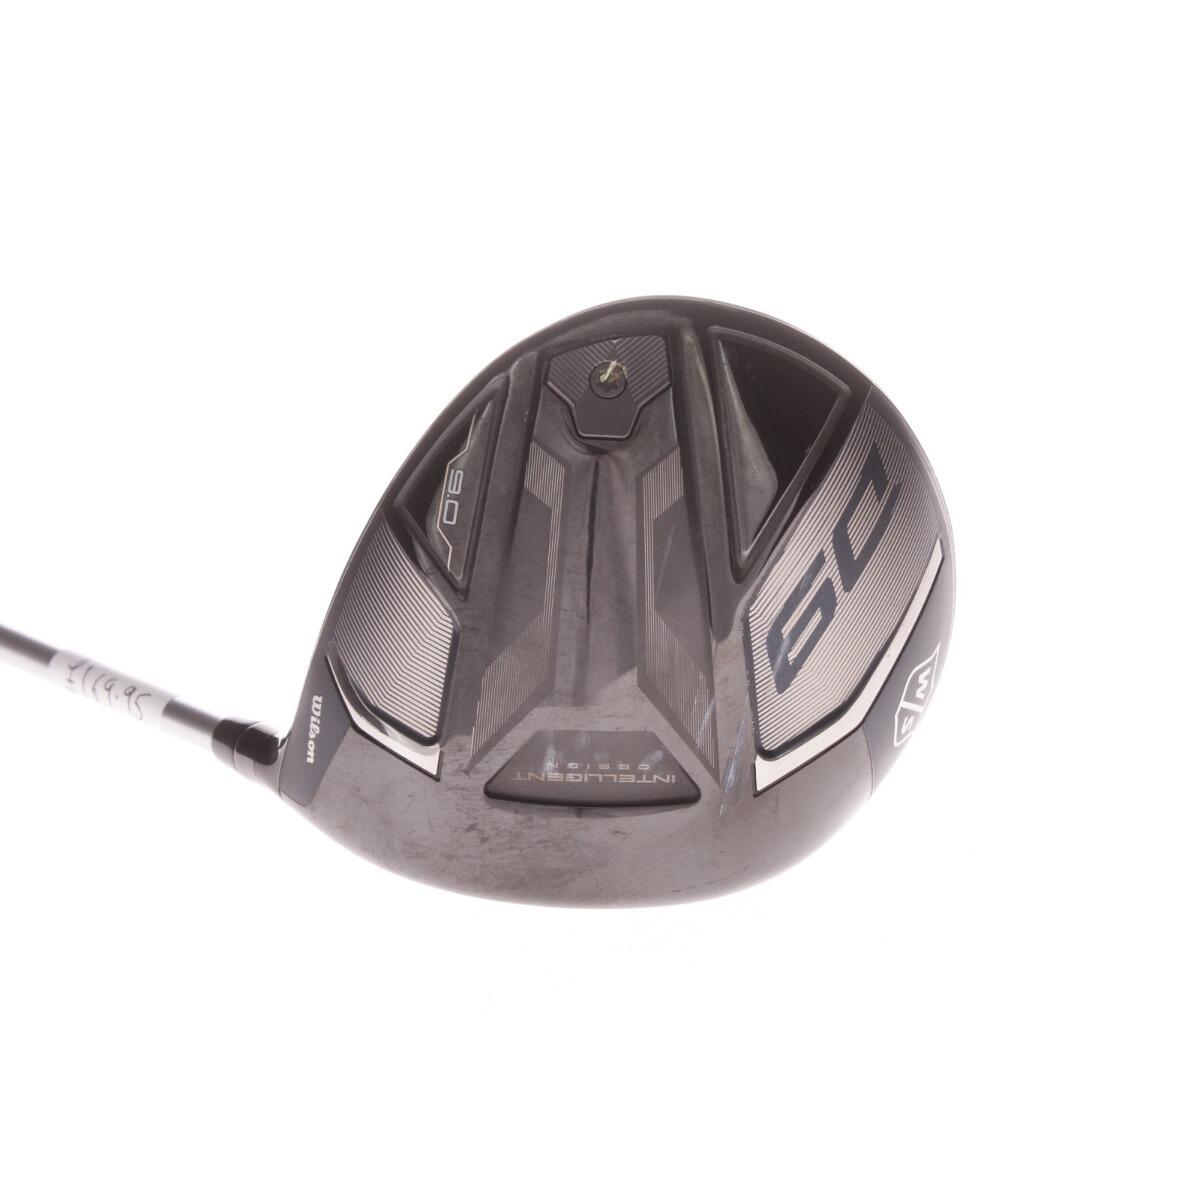 USED - Driver Wilson Staff D9 13 Degree Graphite Shaft Right Handed - GRADE B 2/7